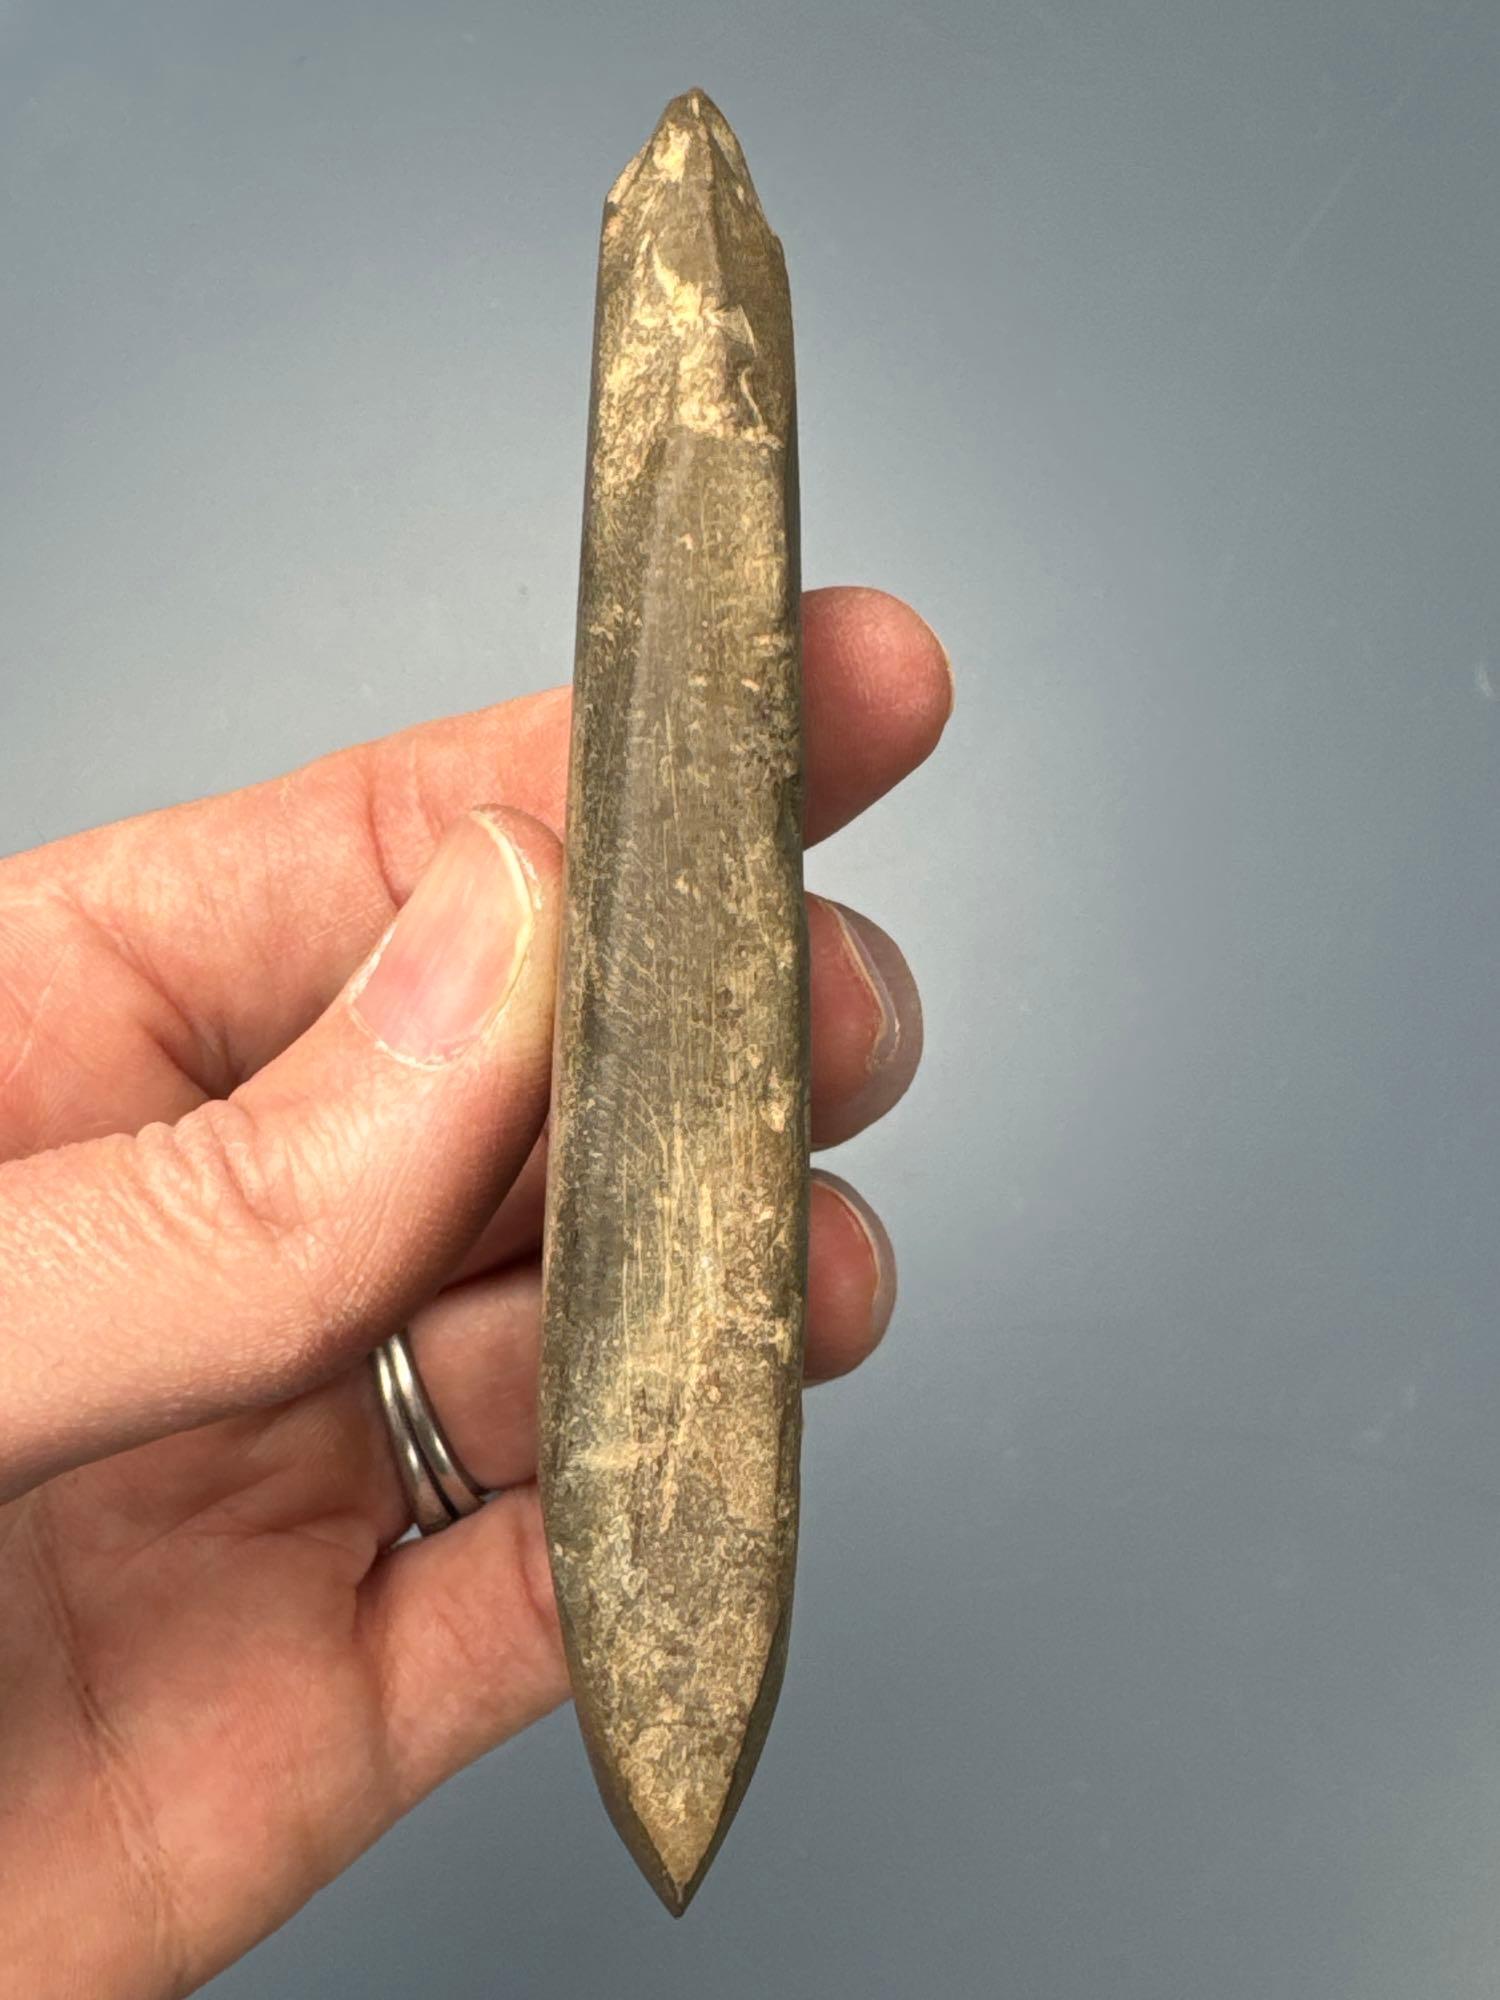 Nice 4" Celt, Found in Lycoming Co., PA, Ex: Kauffman Collection